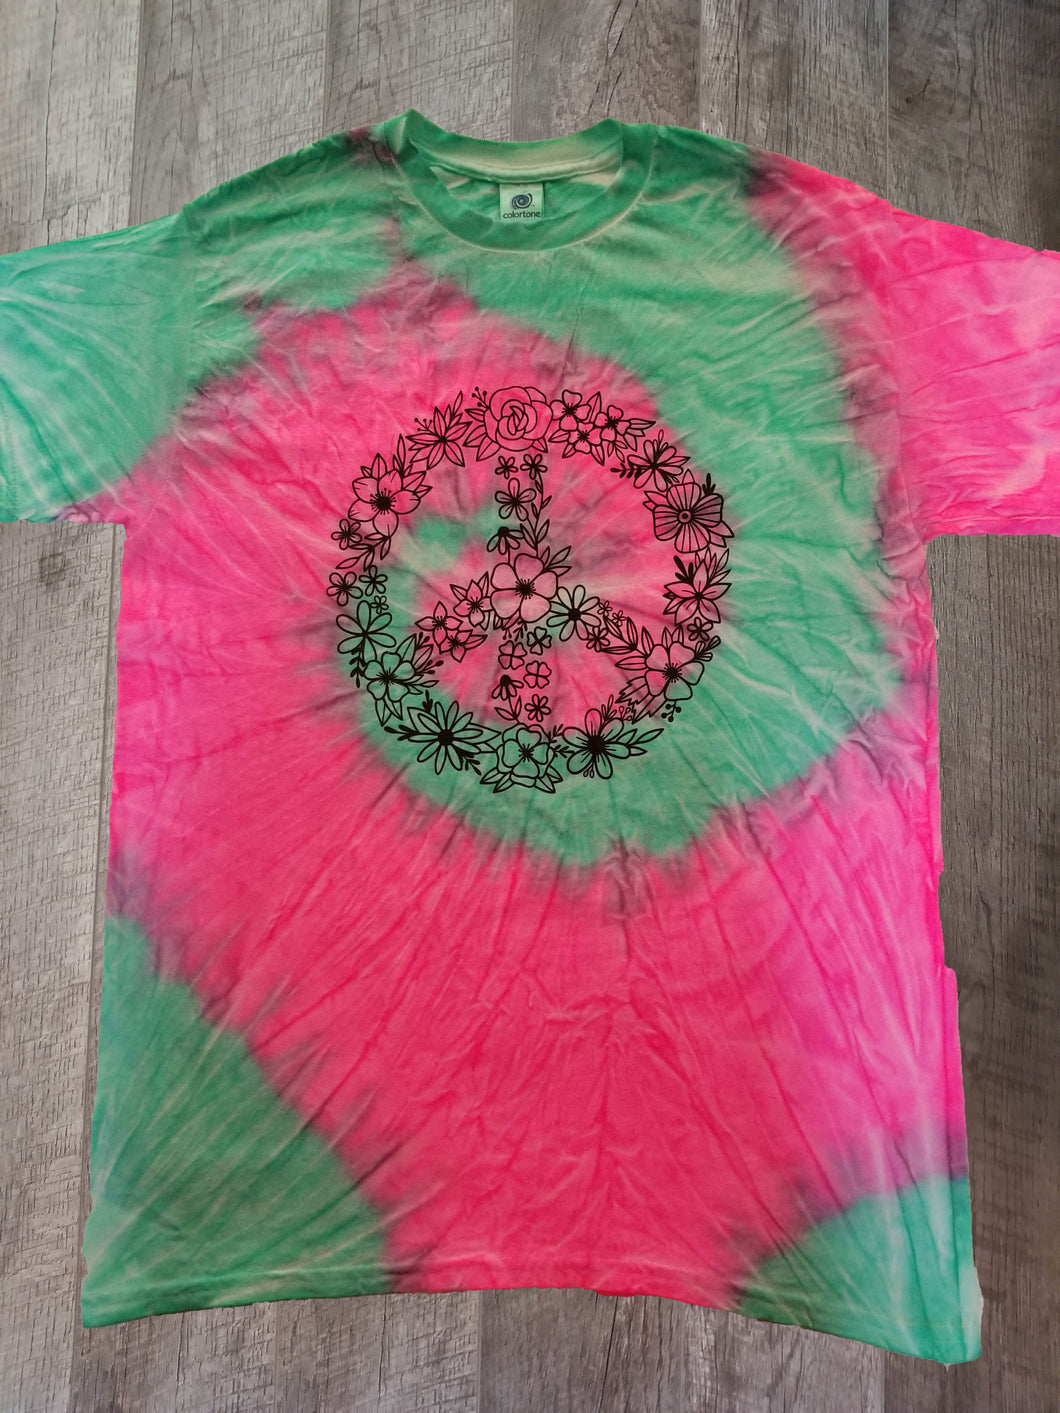 Flowery Peace Sign on Pink/Mint Tie Dye Shirt